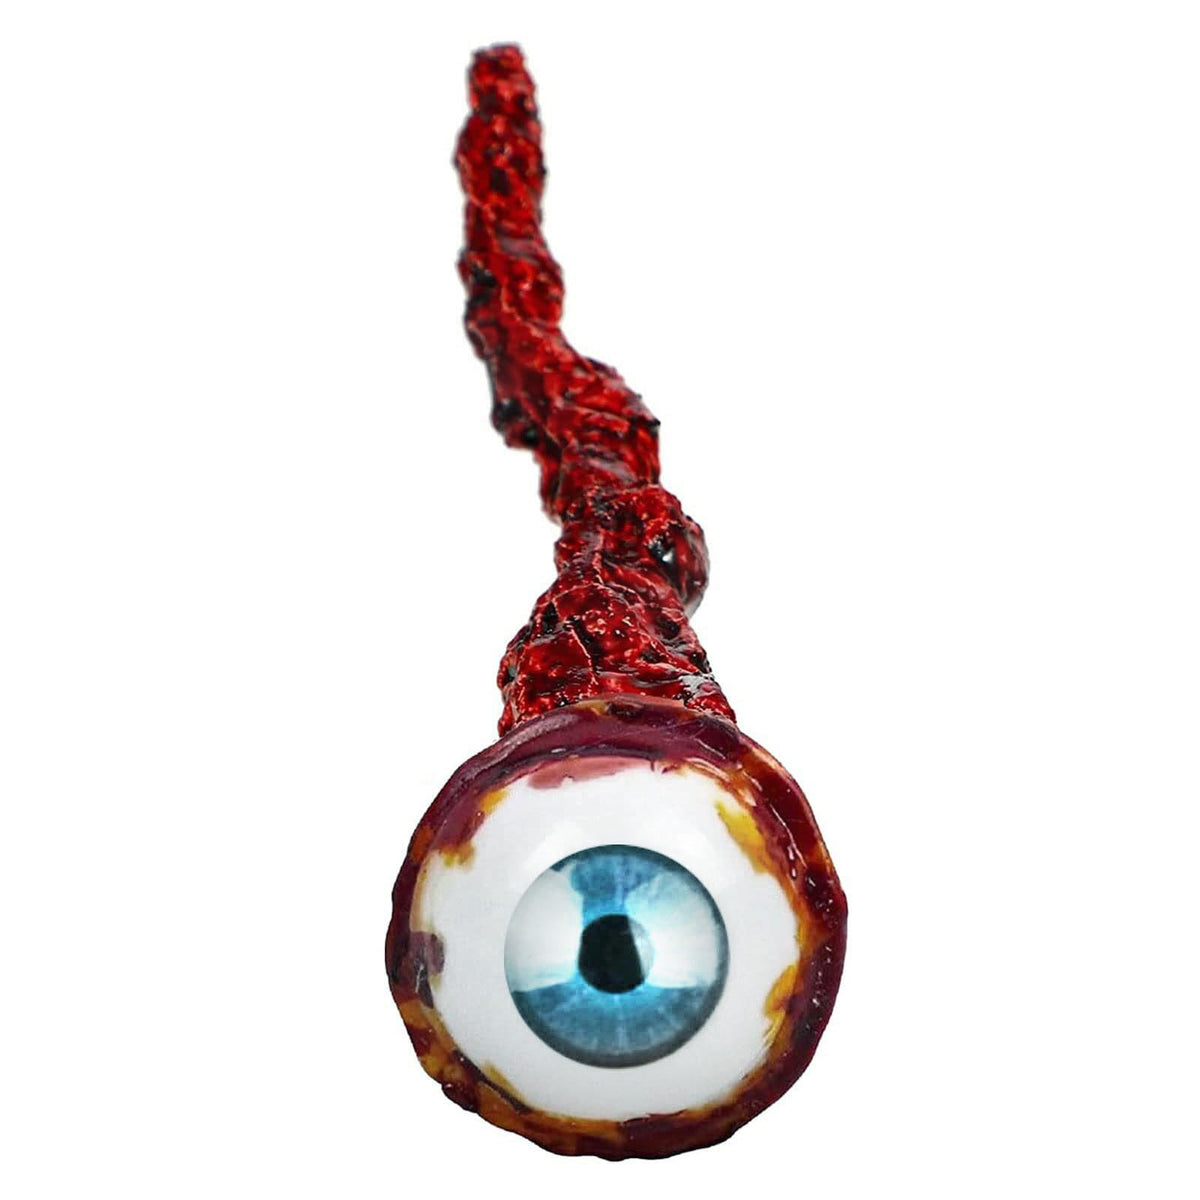 Ripped Out Eyeball Horror Bloody Fake Eyes Halloween Eyeball Creepy  Handmade Prop Scary Decoration for Party